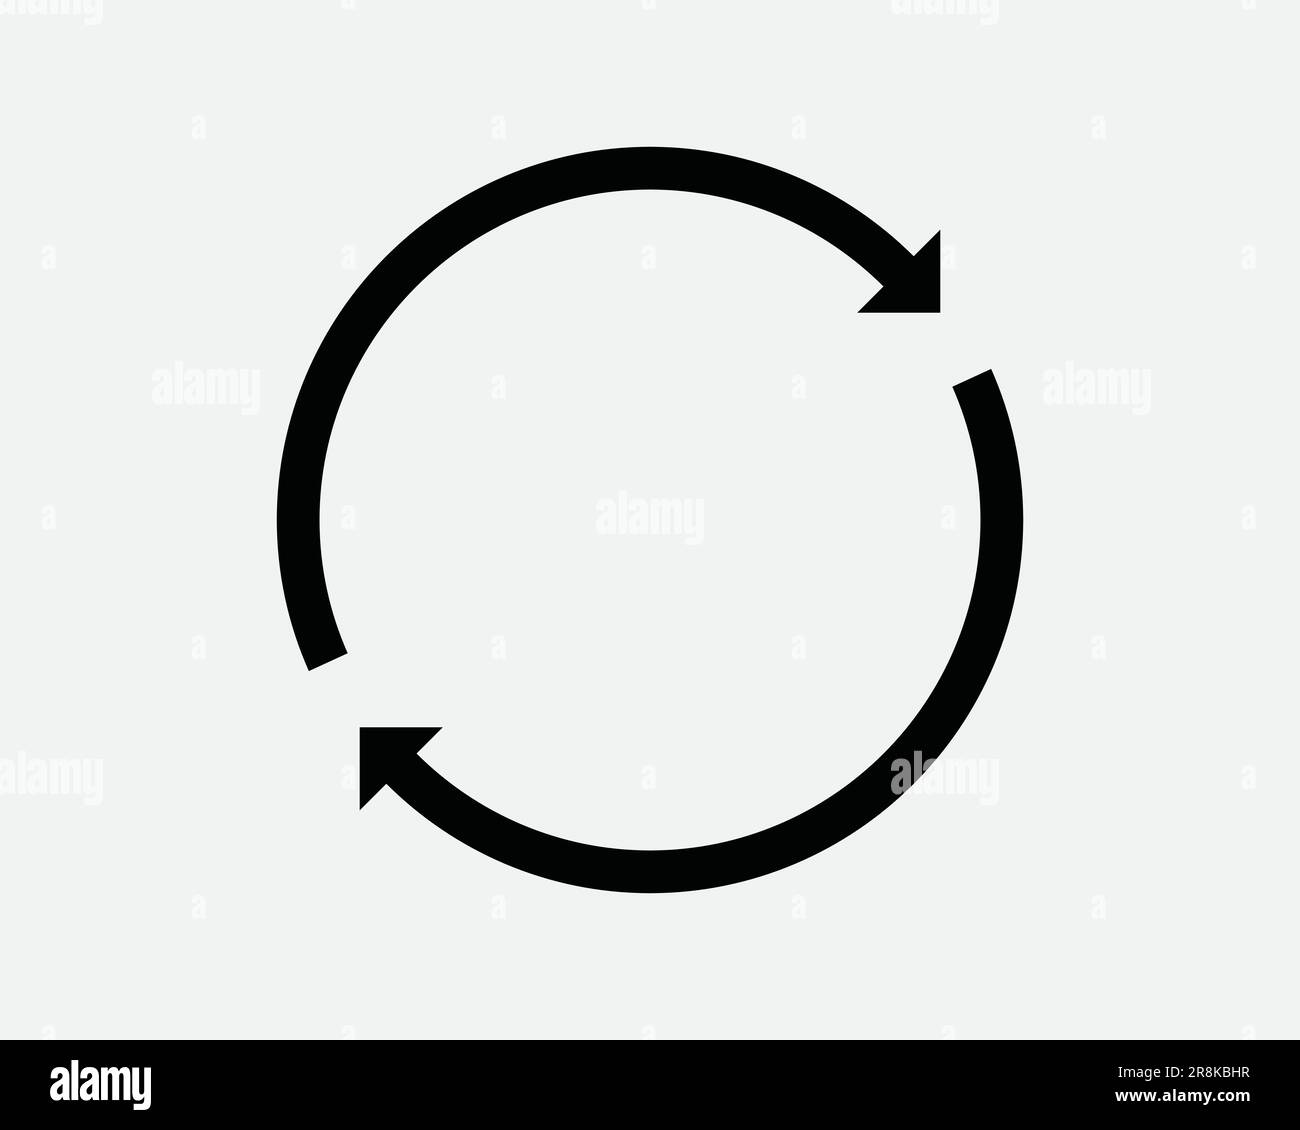 Circle Arrow Icon. Repeat Recycle Refresh Cycle Round Loop Spin Reset Process Black White Sign Symbol Illustration Artwork Graphic Clipart EPS Vector Stock Vector